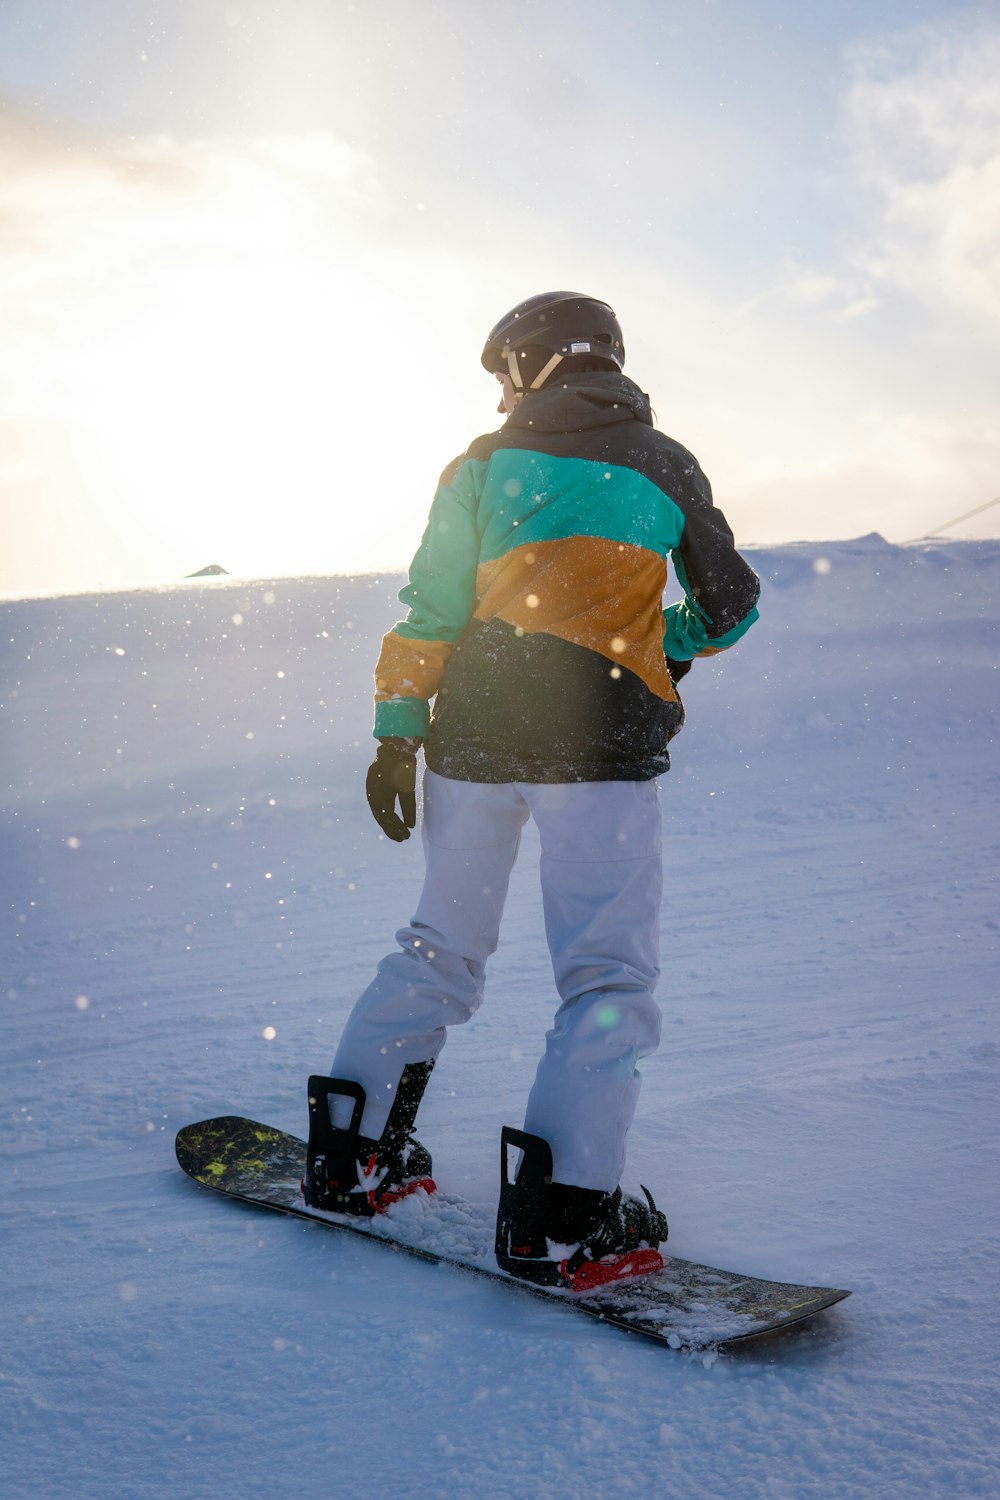 a person standing on a snowboard in the snow